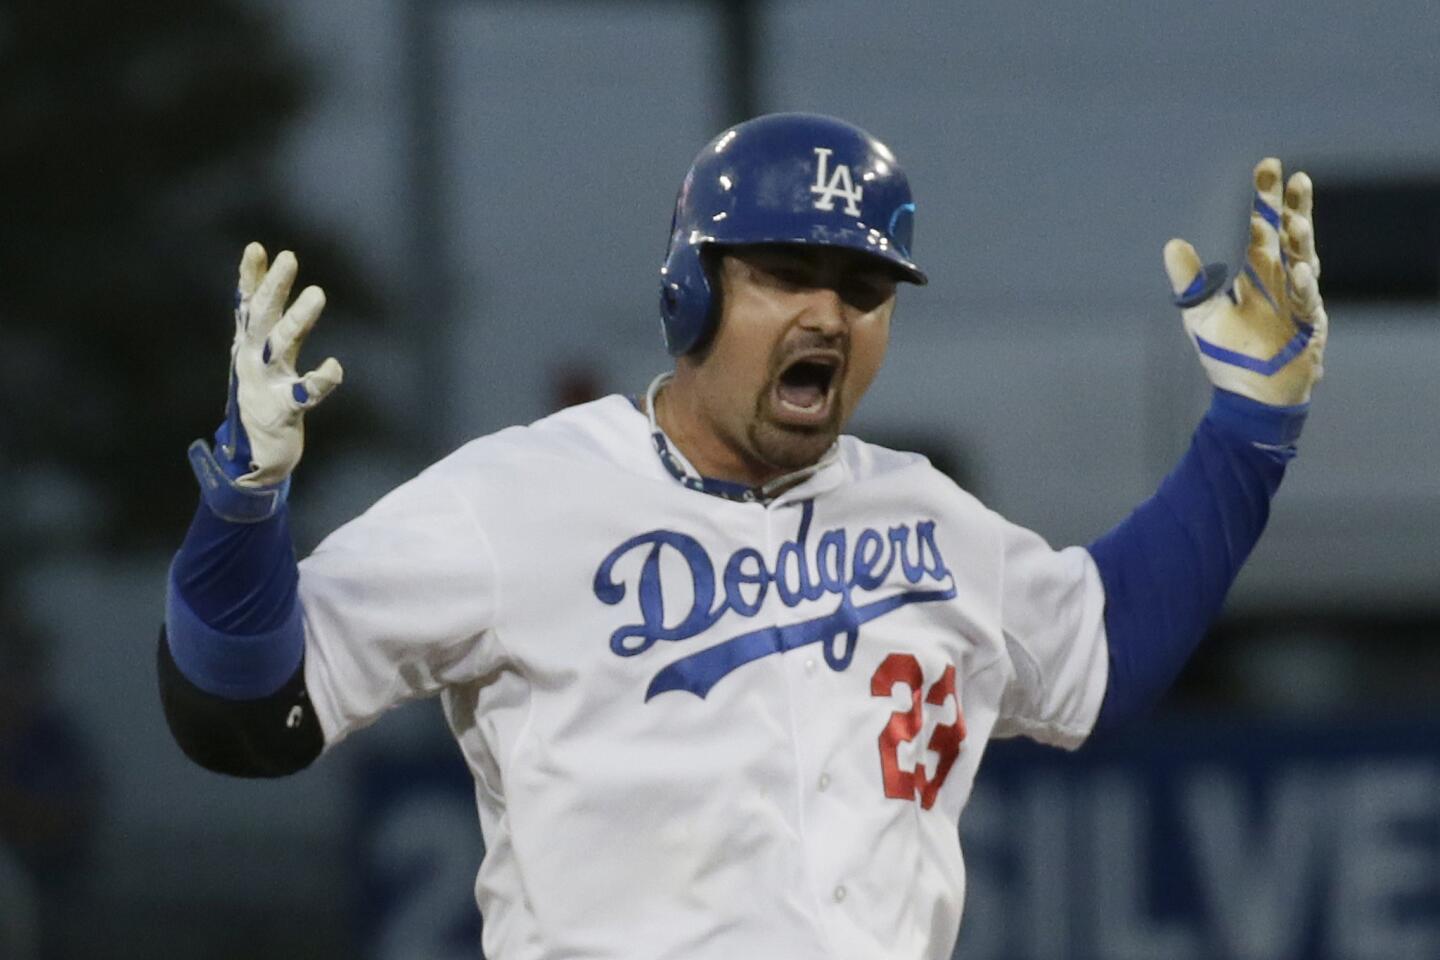 Dodgers first baseman Adrian Gonzalez celebrates after hitting a run-scoring double during the fourth inning of Game 3 of the NLCS against the St. Louis Cardinals.